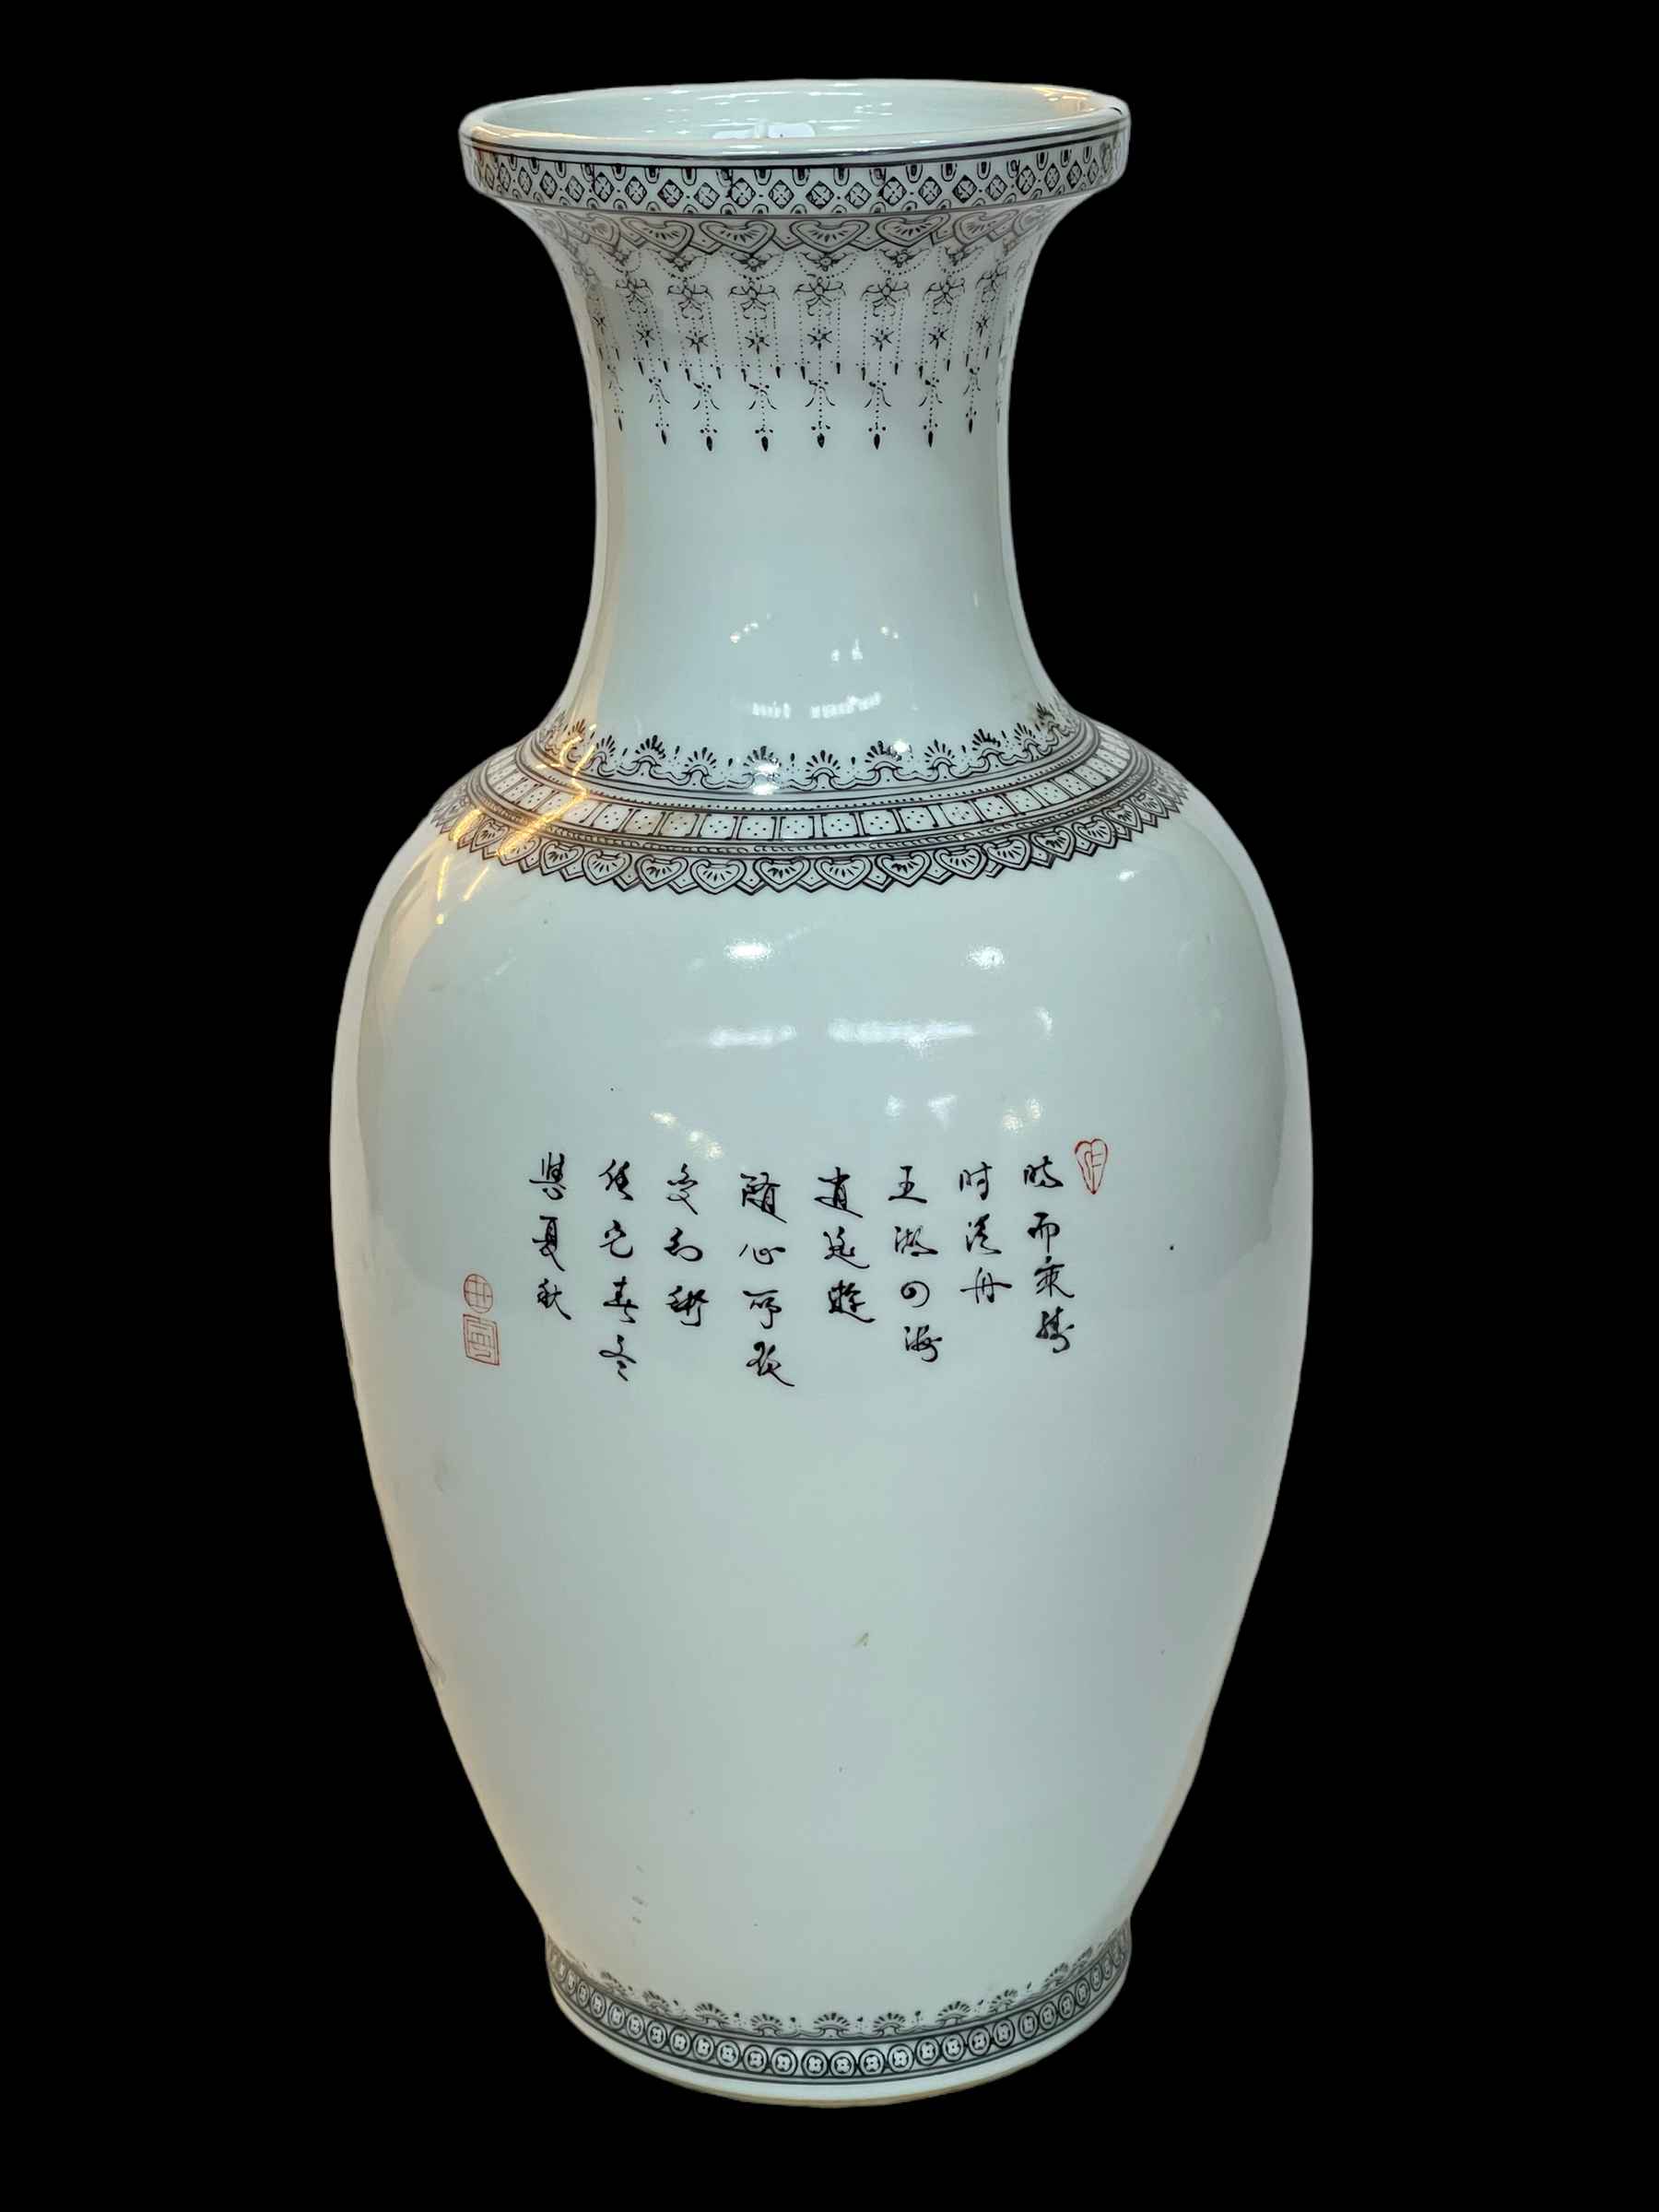 Large Chinese Republic vase decorated with figures and verse, red seal mark to base, 35.5cm. - Image 3 of 4